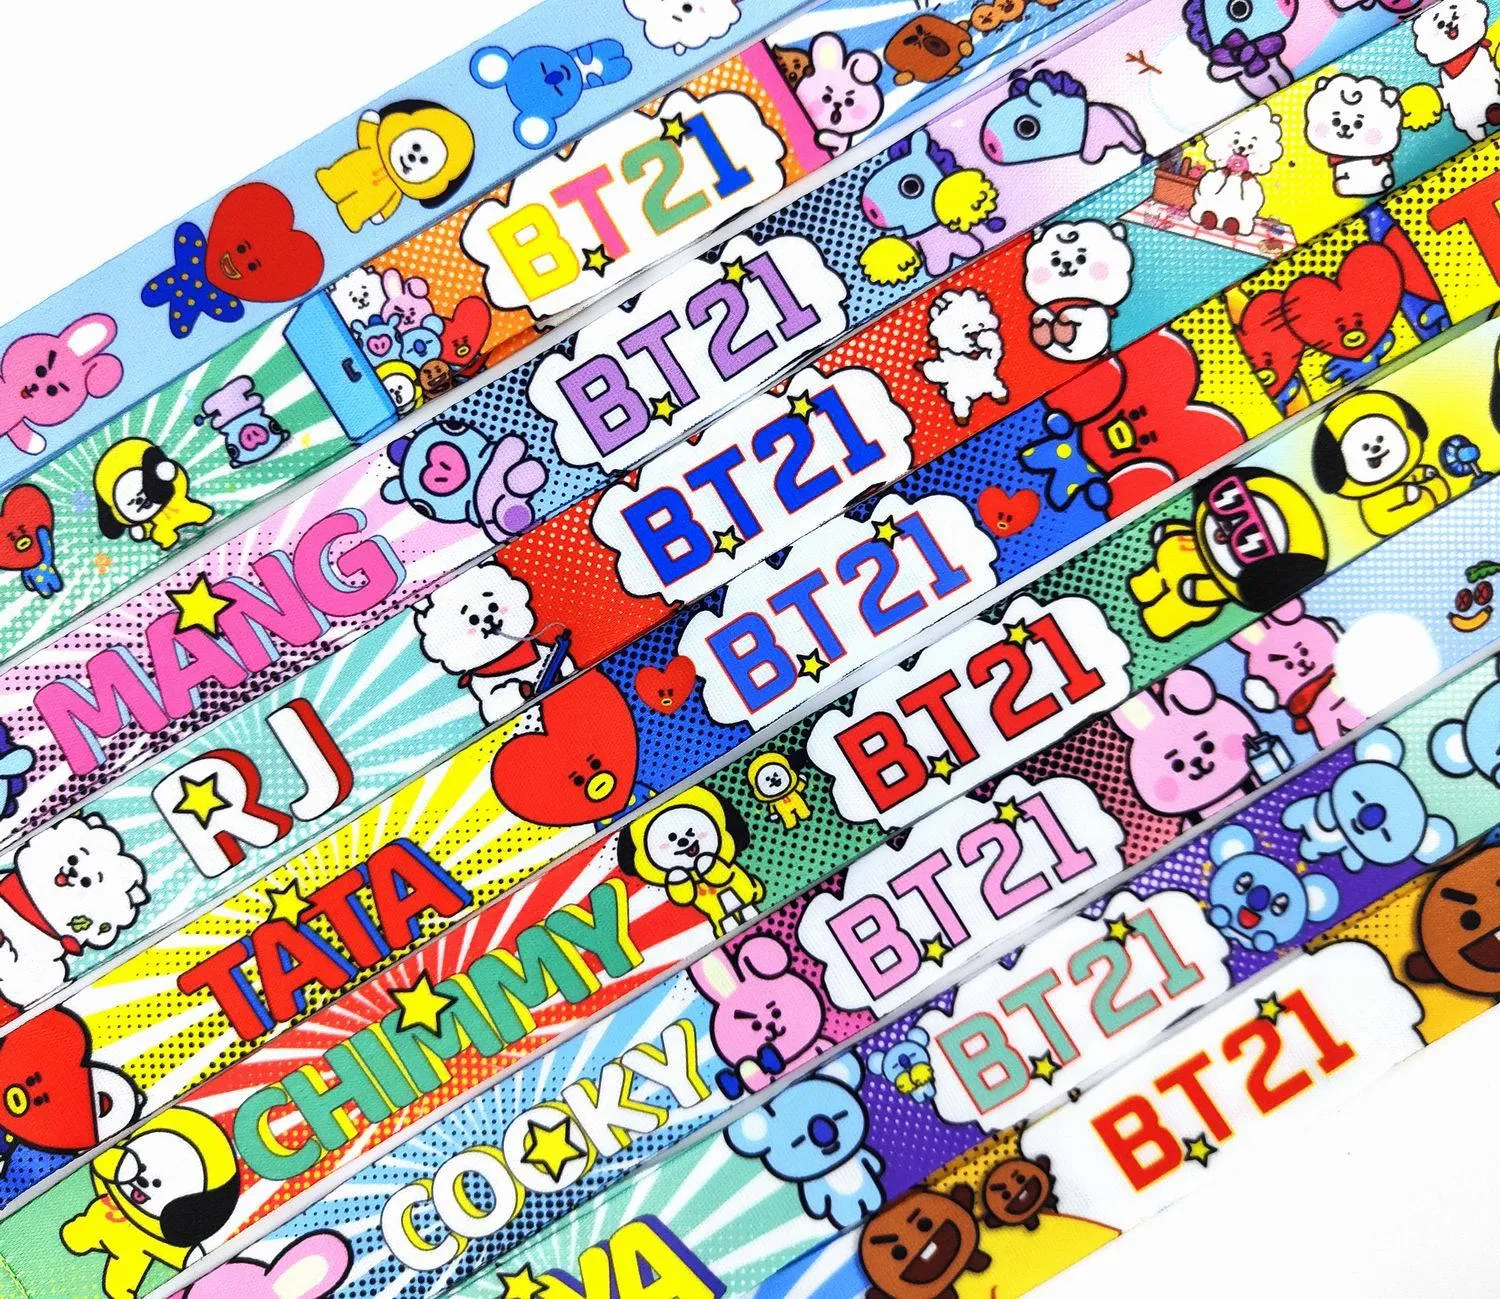 Anime BTS21 Cartoon Lanyard for keychain id card cover pass pass student badge studge key key ring straps